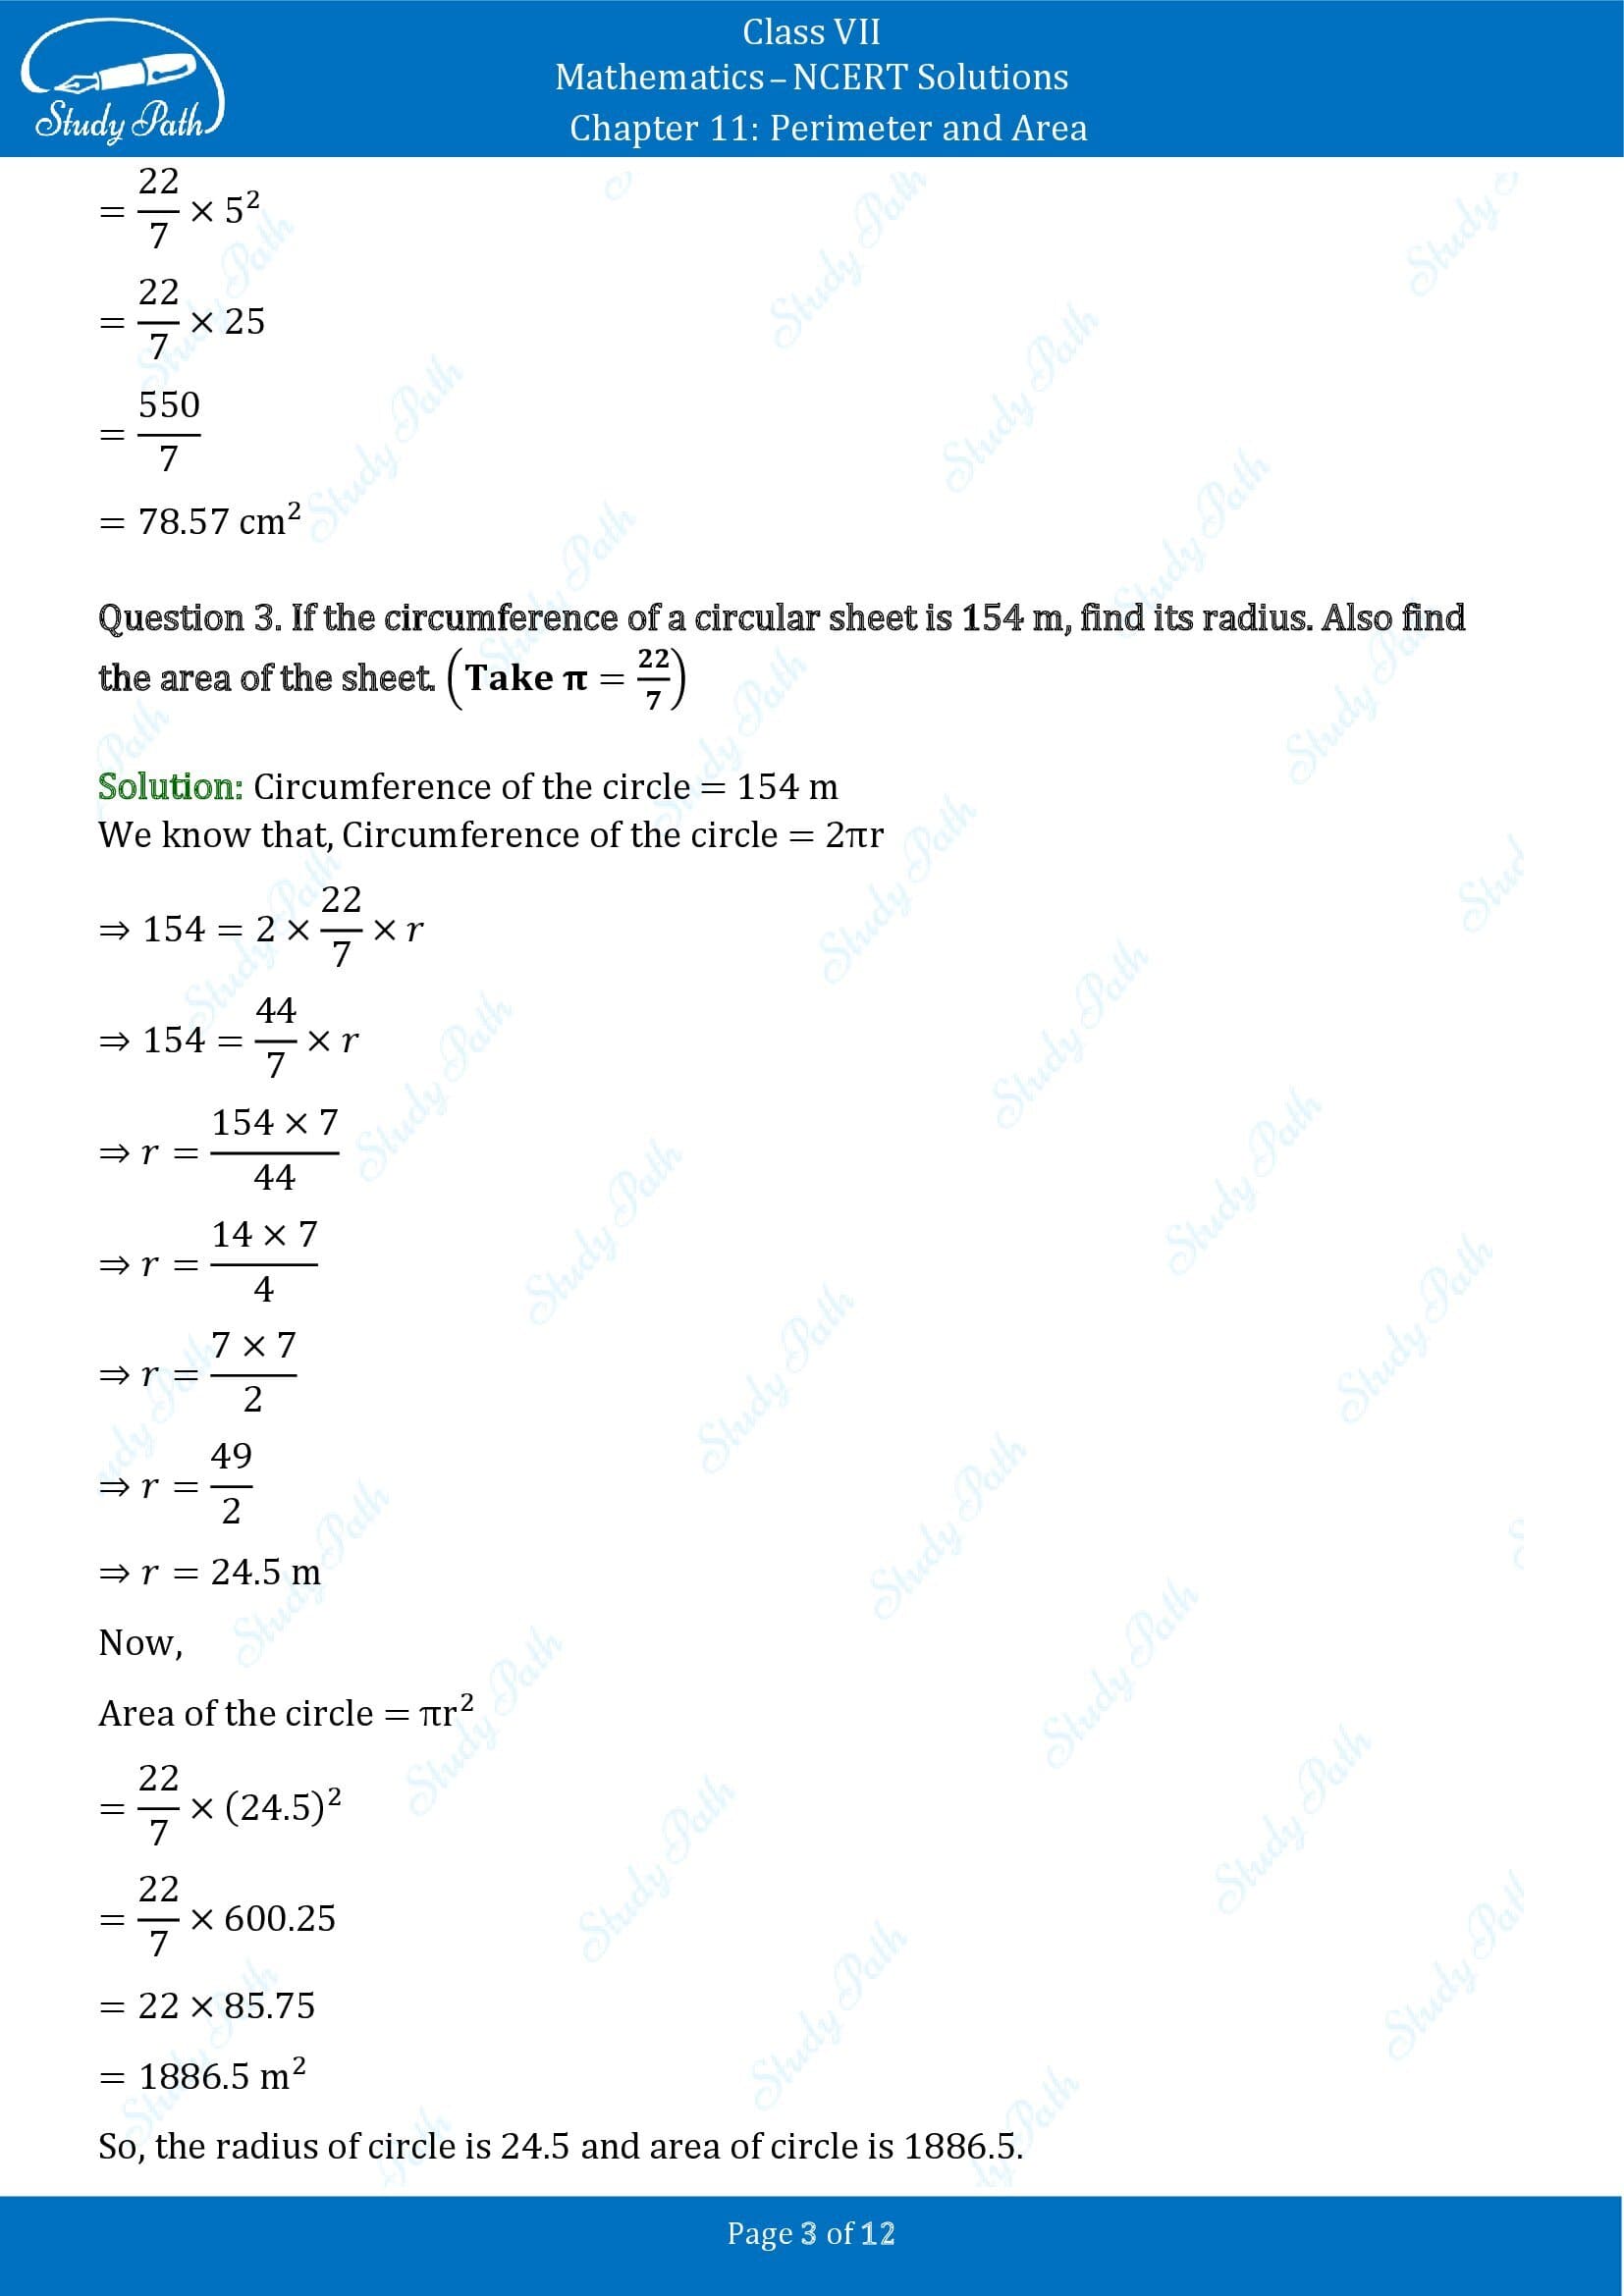 NCERT Solutions for Class 7 Maths Chapter 11 Perimeter and Area Exercise 11.3 00003